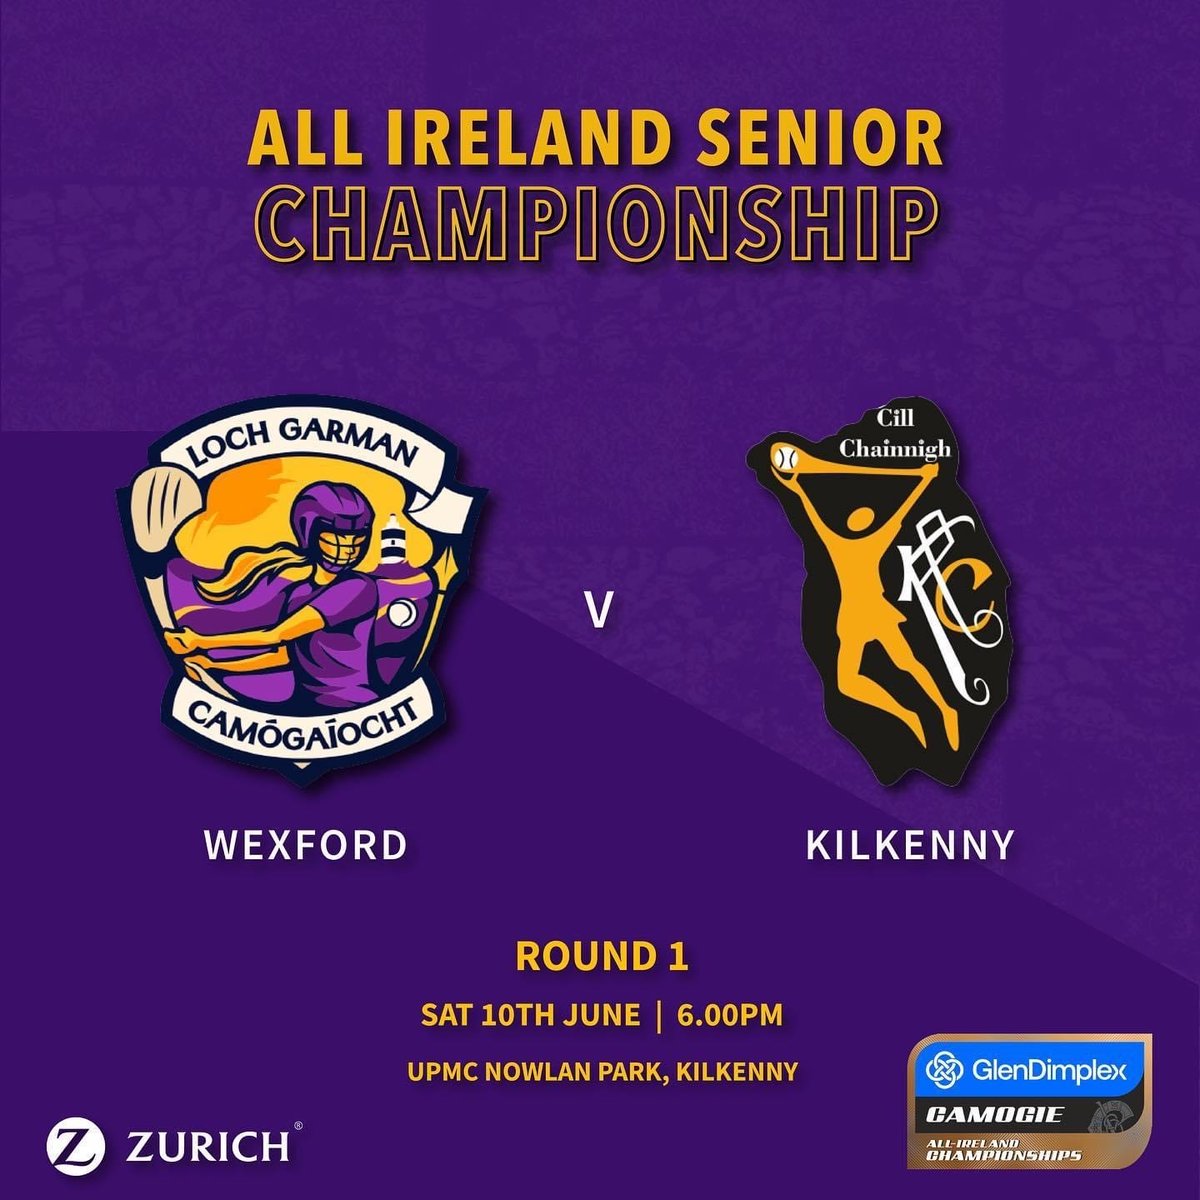 Senior camogie team away to Kilkenny in the first round of the GlenDimplex All-Ireland Senior Championship on Saturday. 

#proudsponsors 

@wexfordcamogie